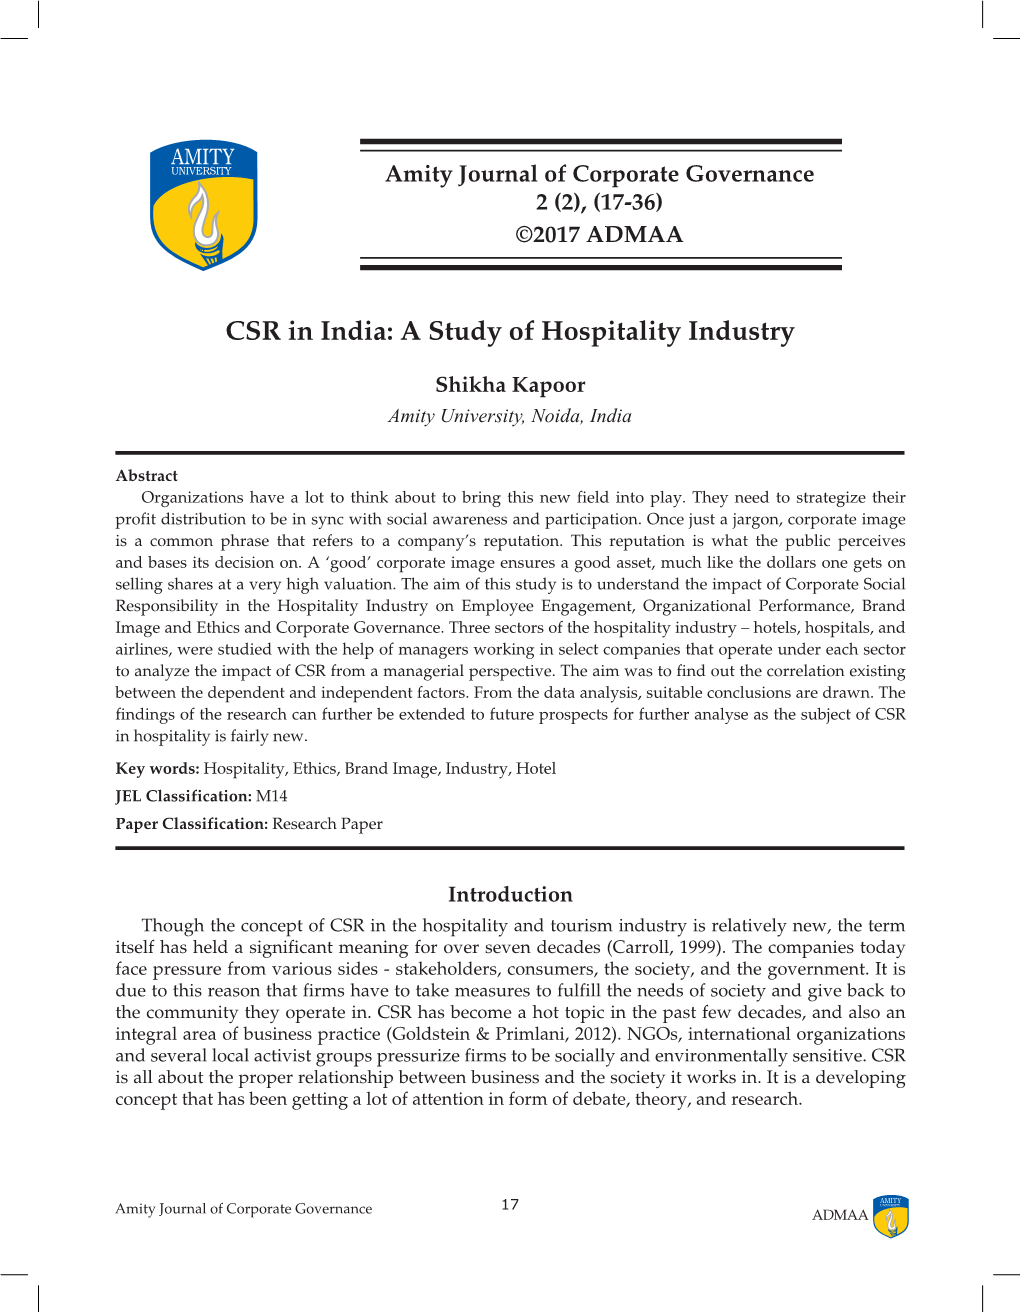 CSR in India: a Study of Hospitality Industry